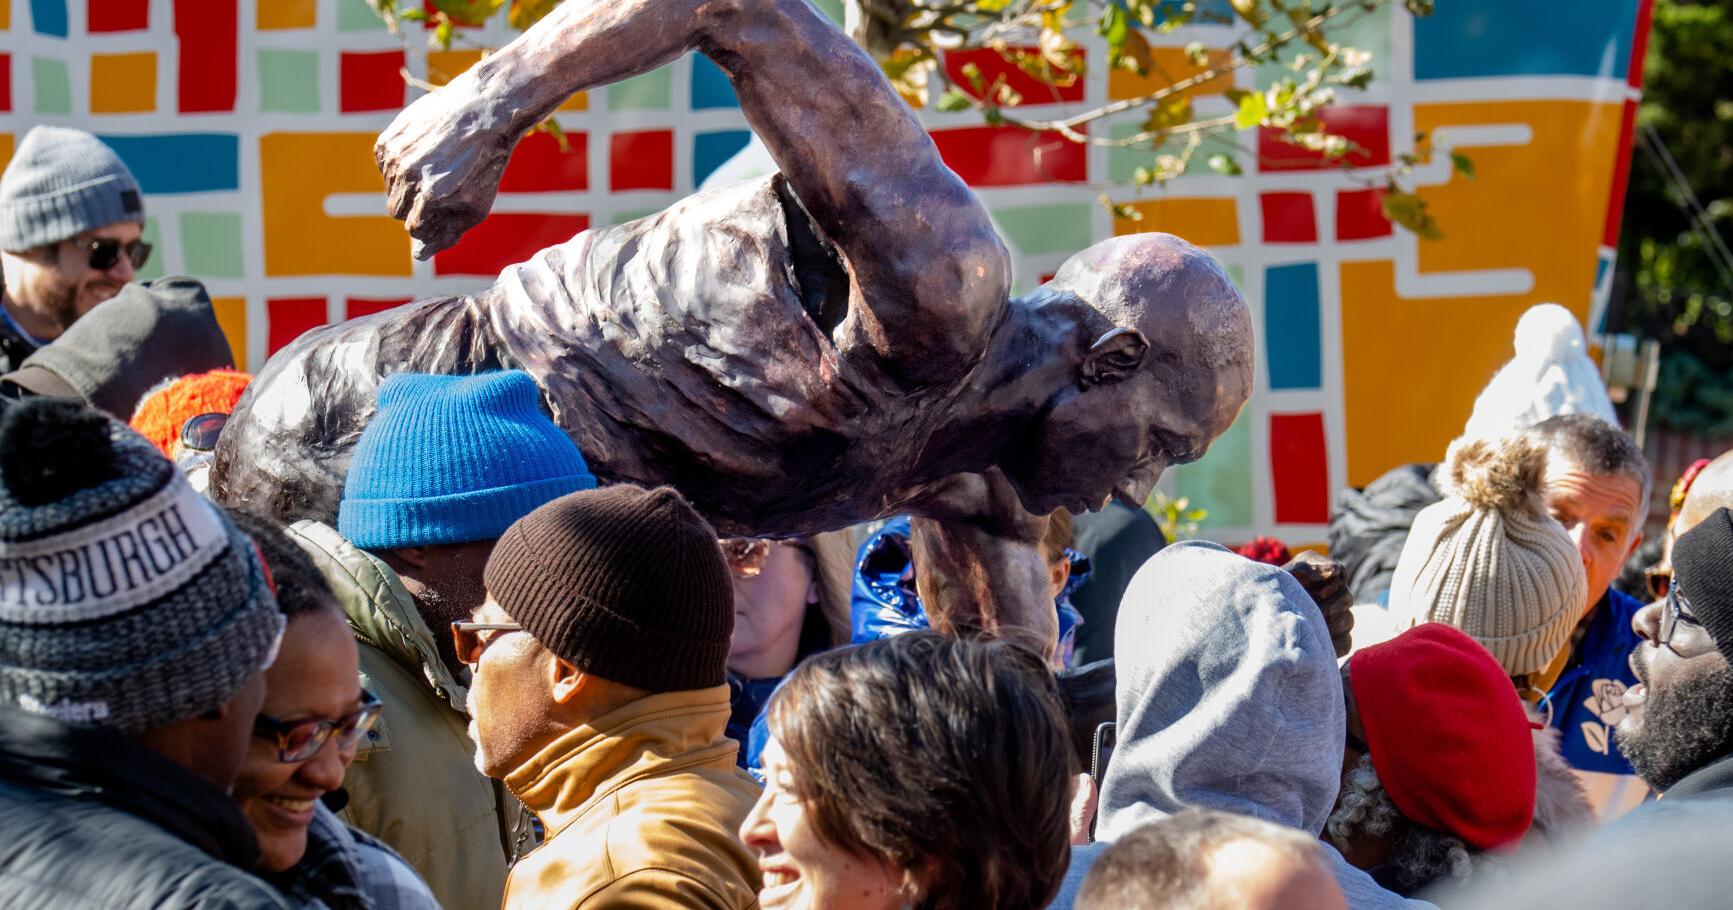 Statue of Barney Ewell dedicated in Lancaster City plaza [photos]